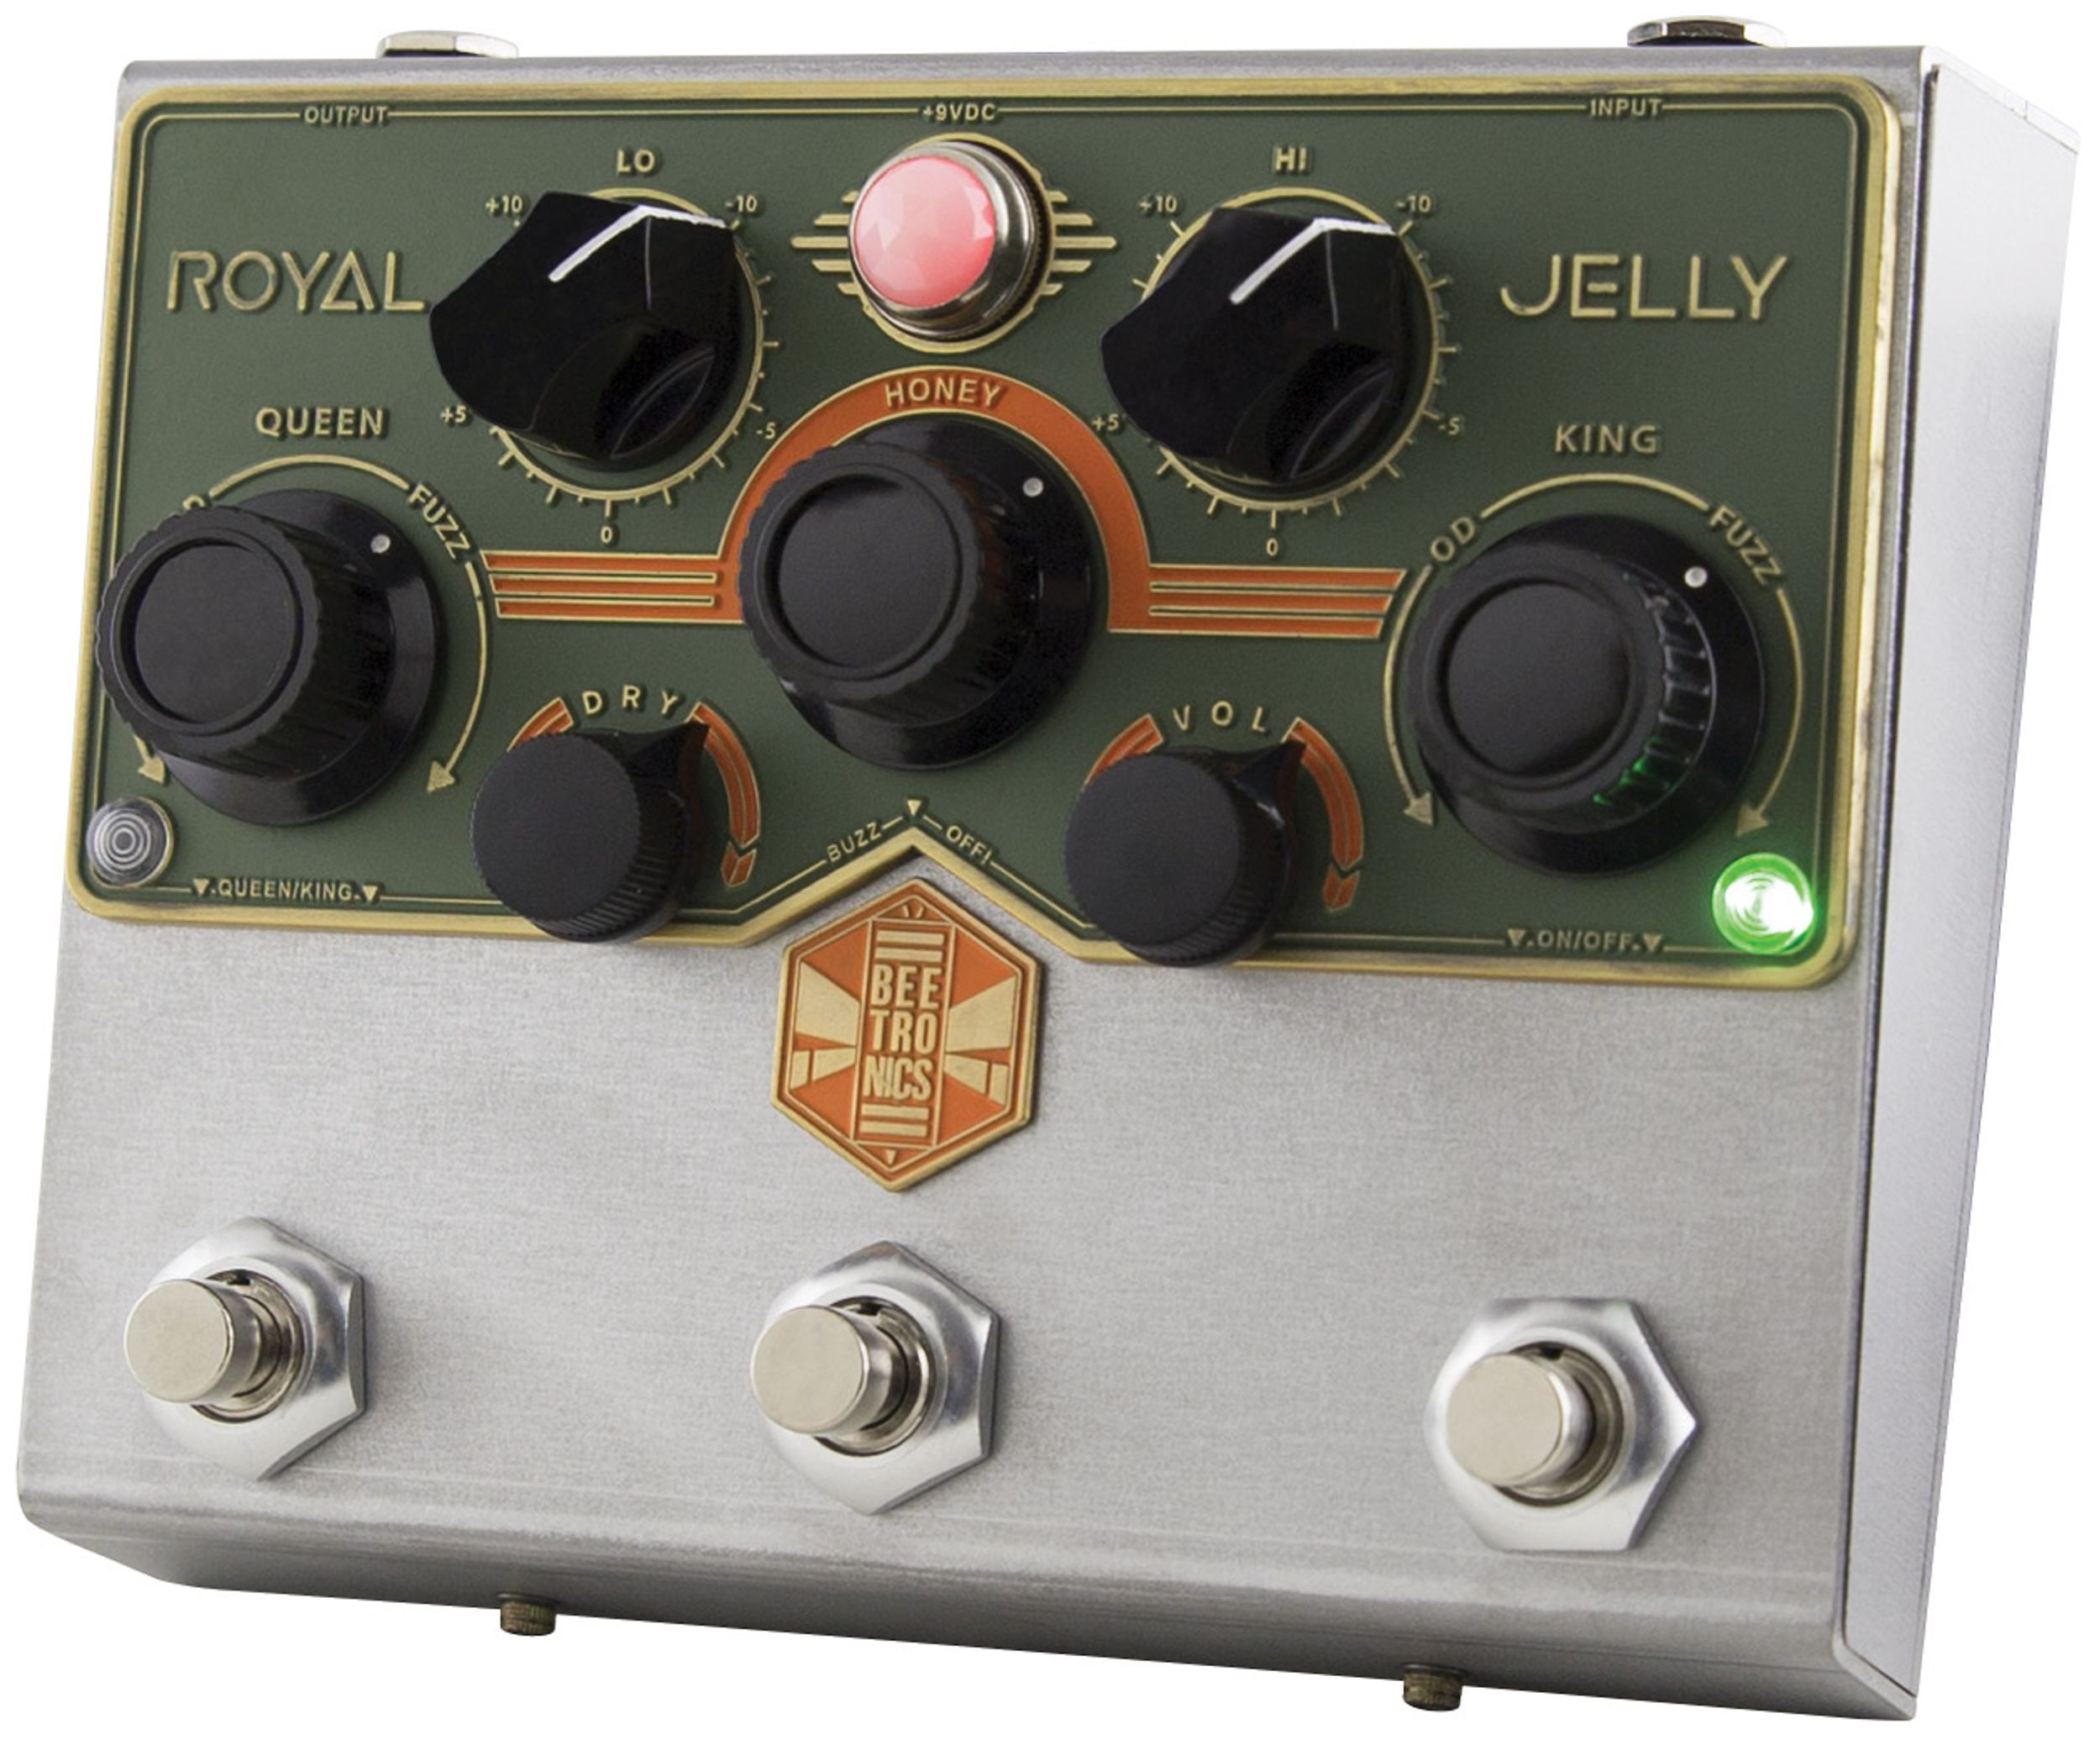 Beetronics Royal Jelly Review